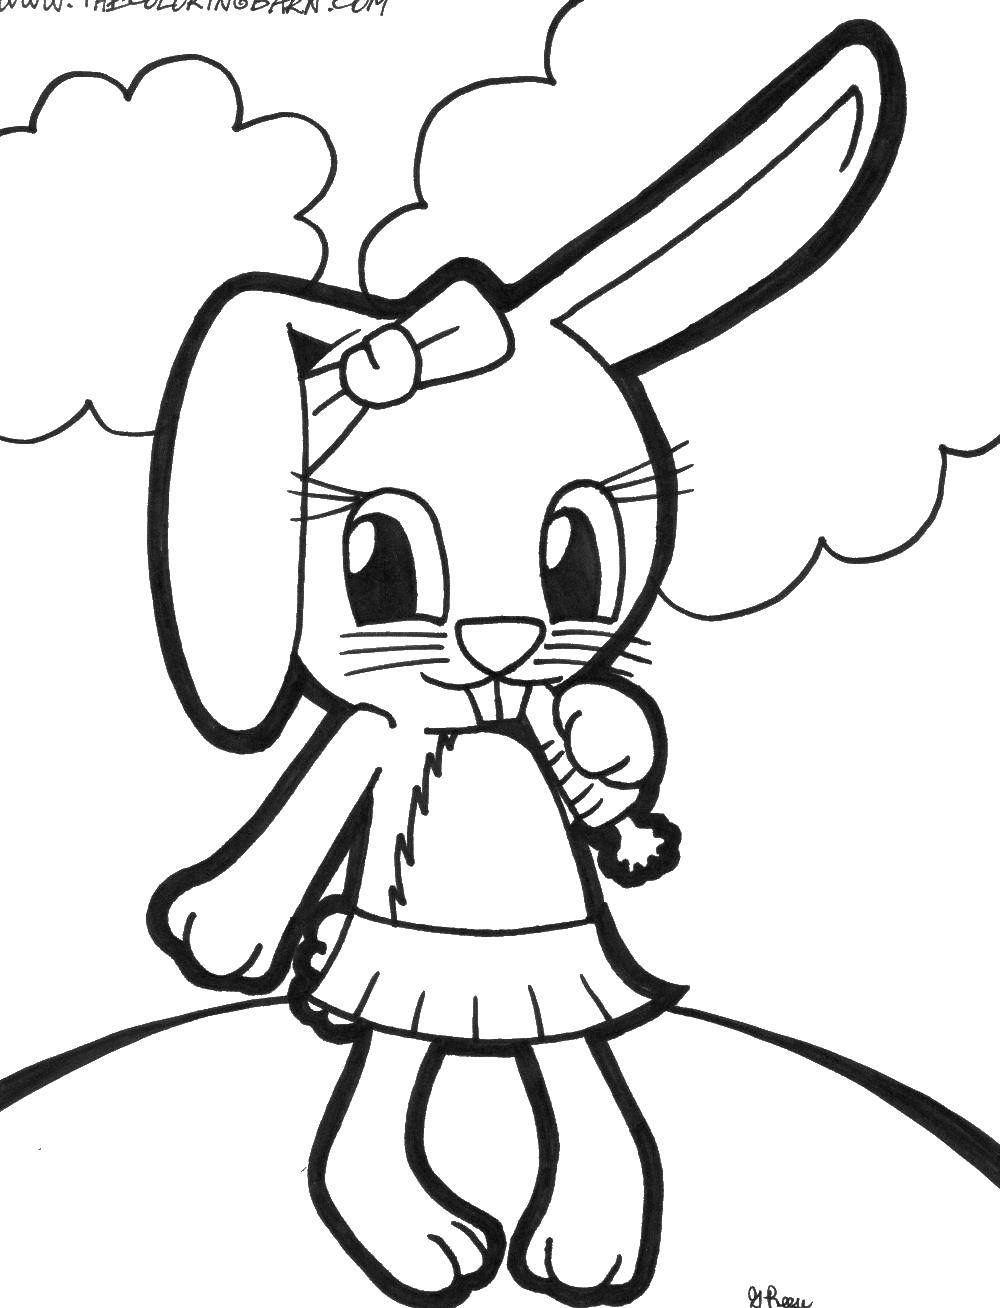 Coloring Rabbit. Category the rabbit. Tags:  the rabbit.